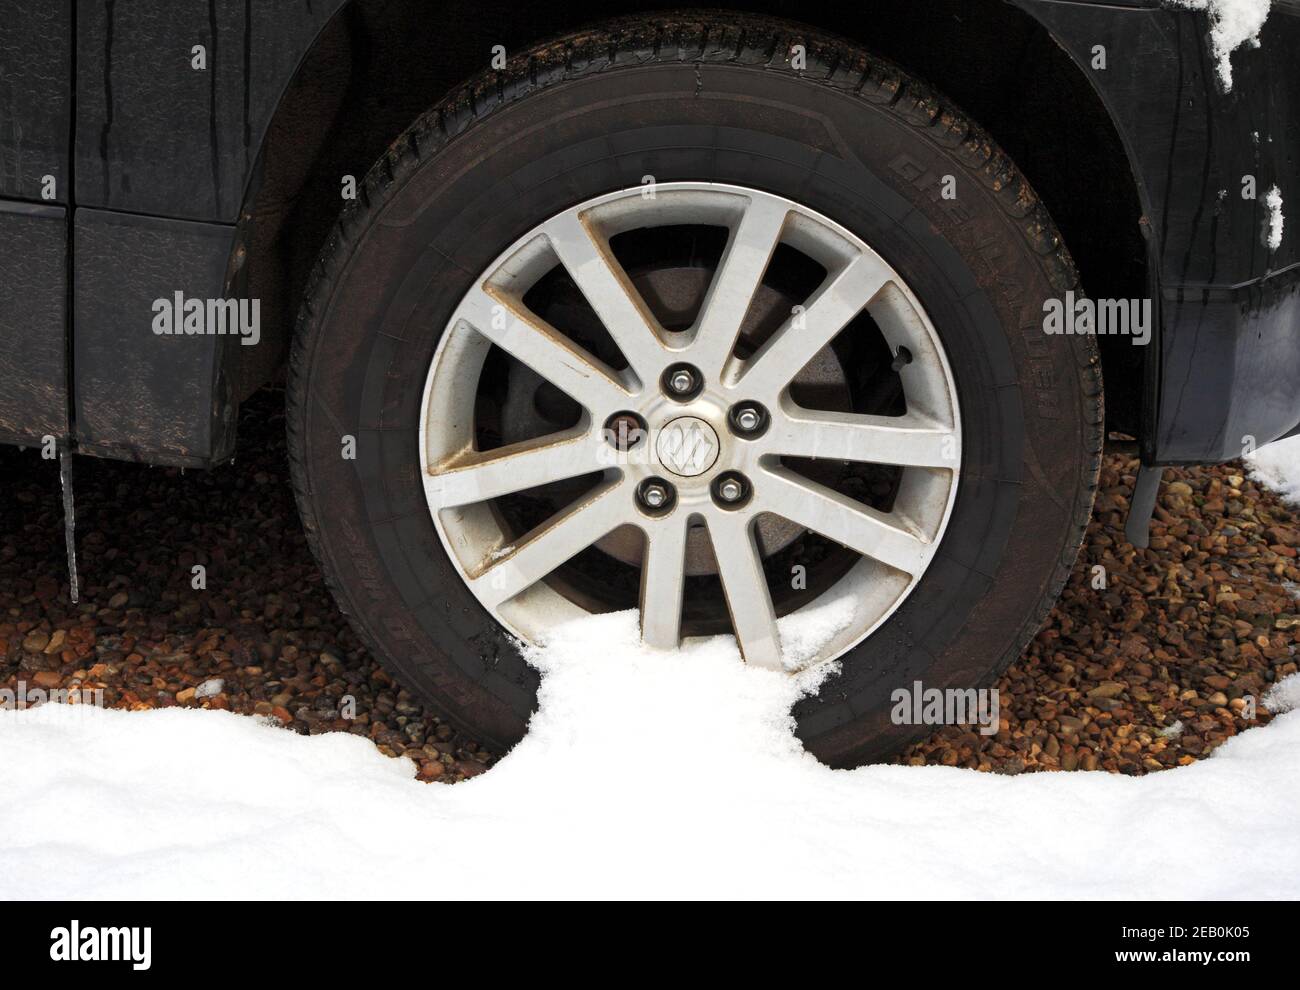 The front offside wheel of a Suzuki Grand Vitara XEC parked in winter conditions with snow and icicle hanging from bodywork. Stock Photo